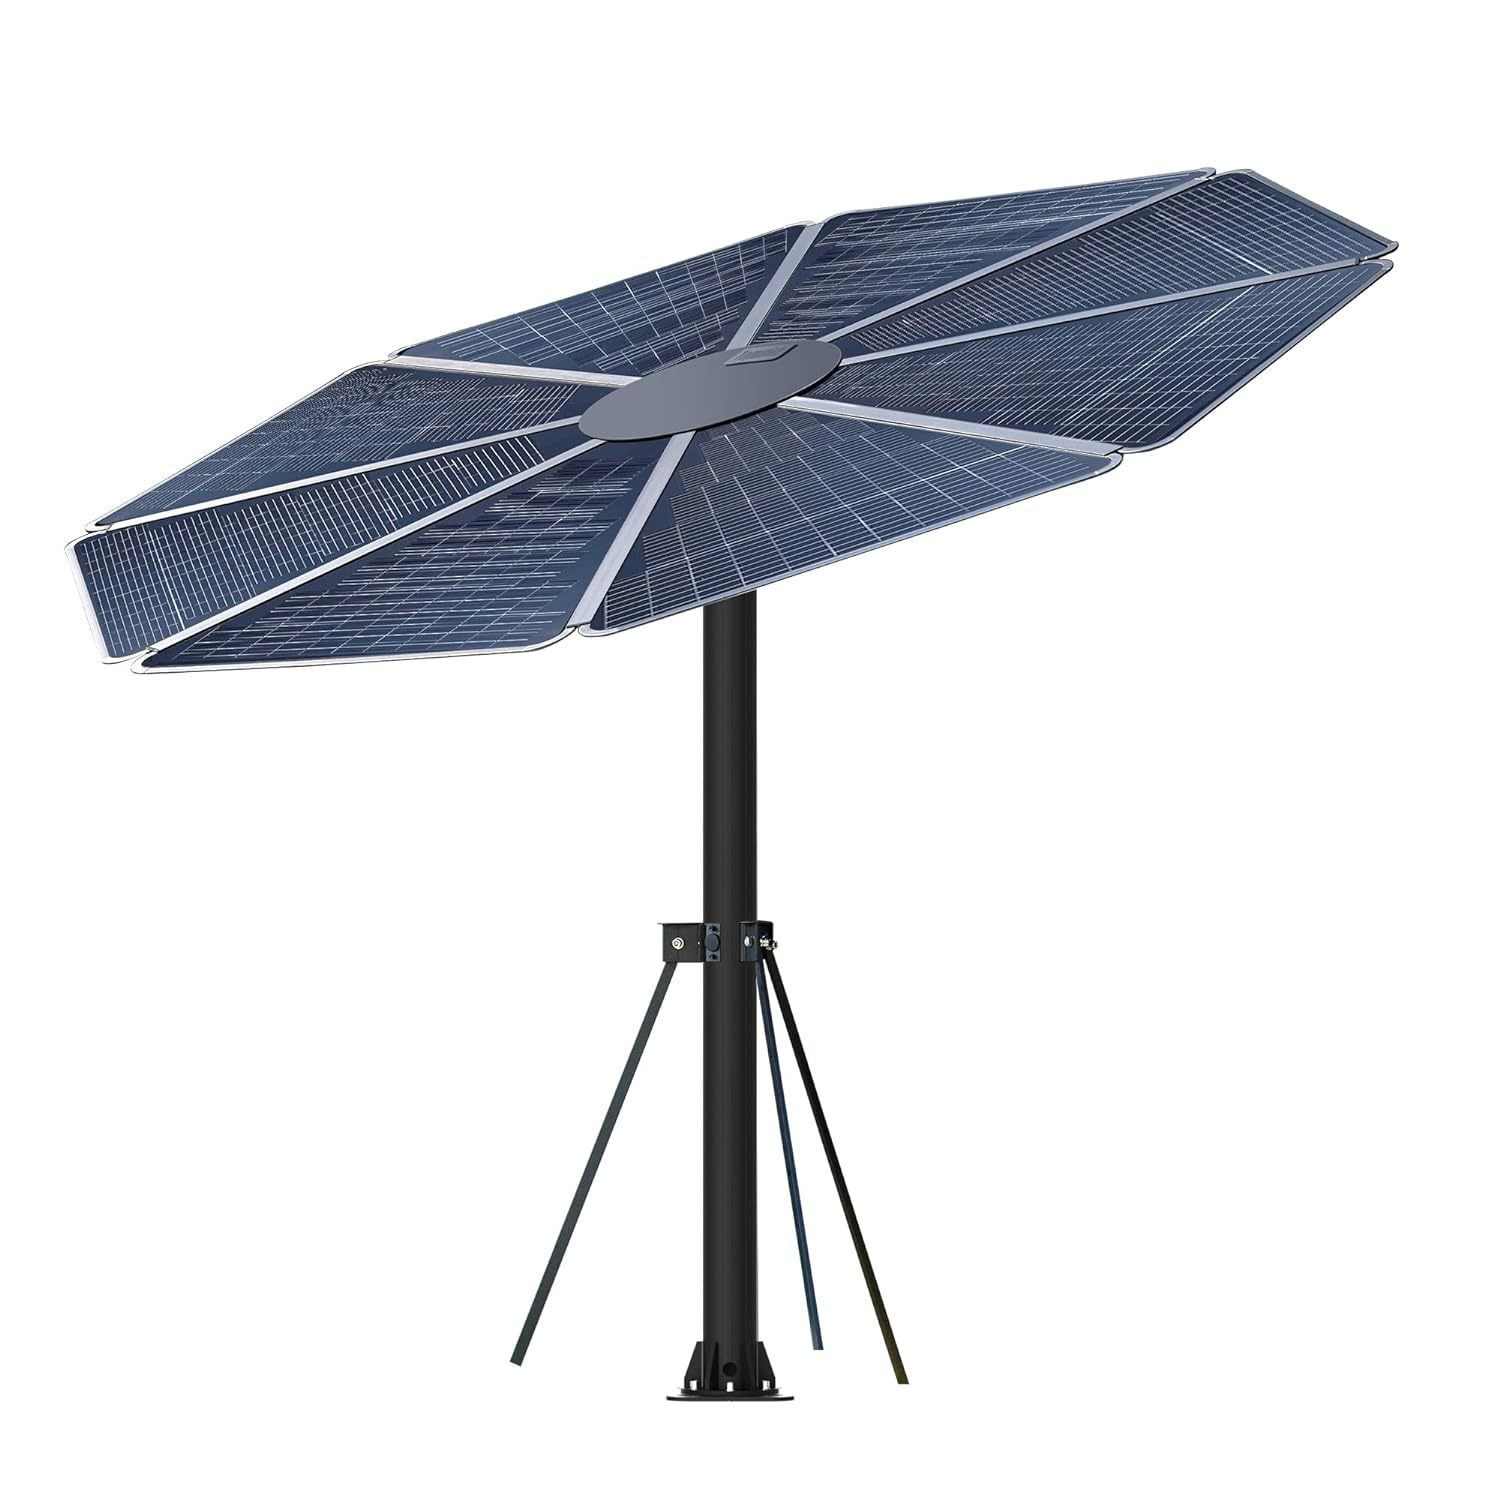 Harness the Power of the Sun with Our Innovative Solar Parasol System